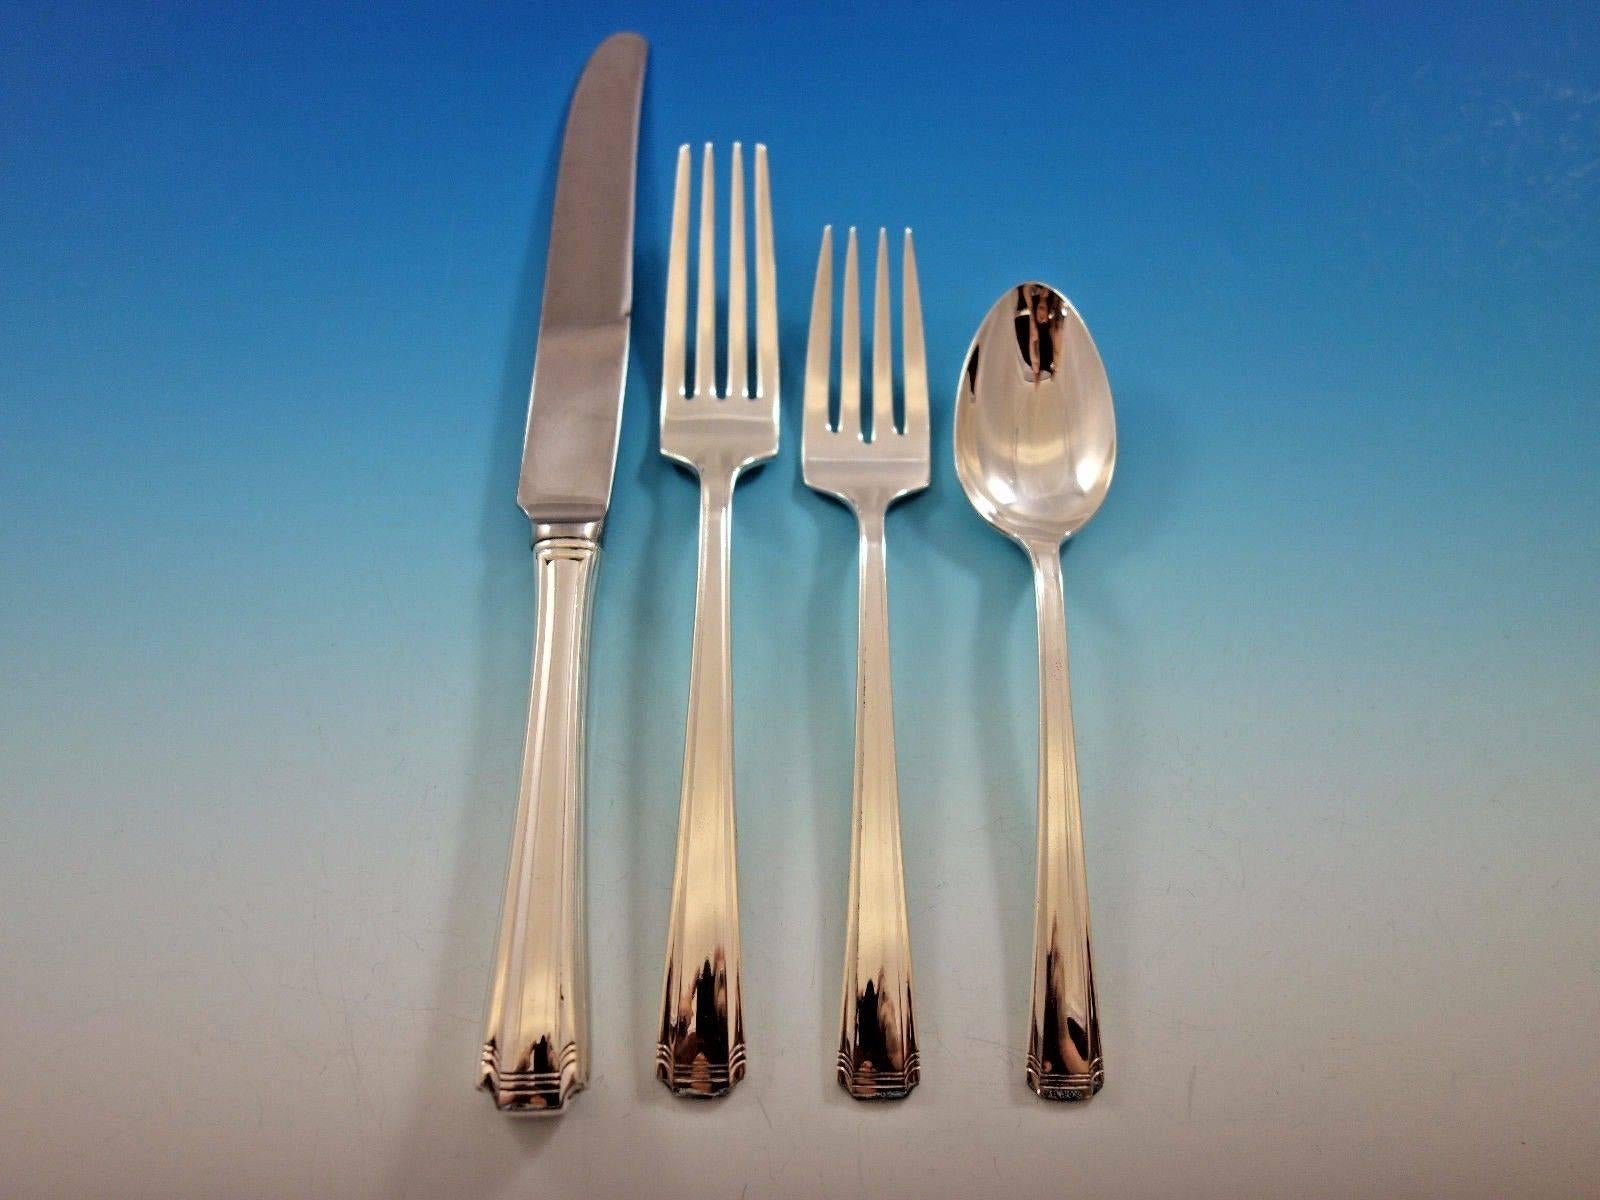 John and Priscilla by Westmorland sterling silver flatware set - 32 pieces. This set includes: 

eight knives, 9